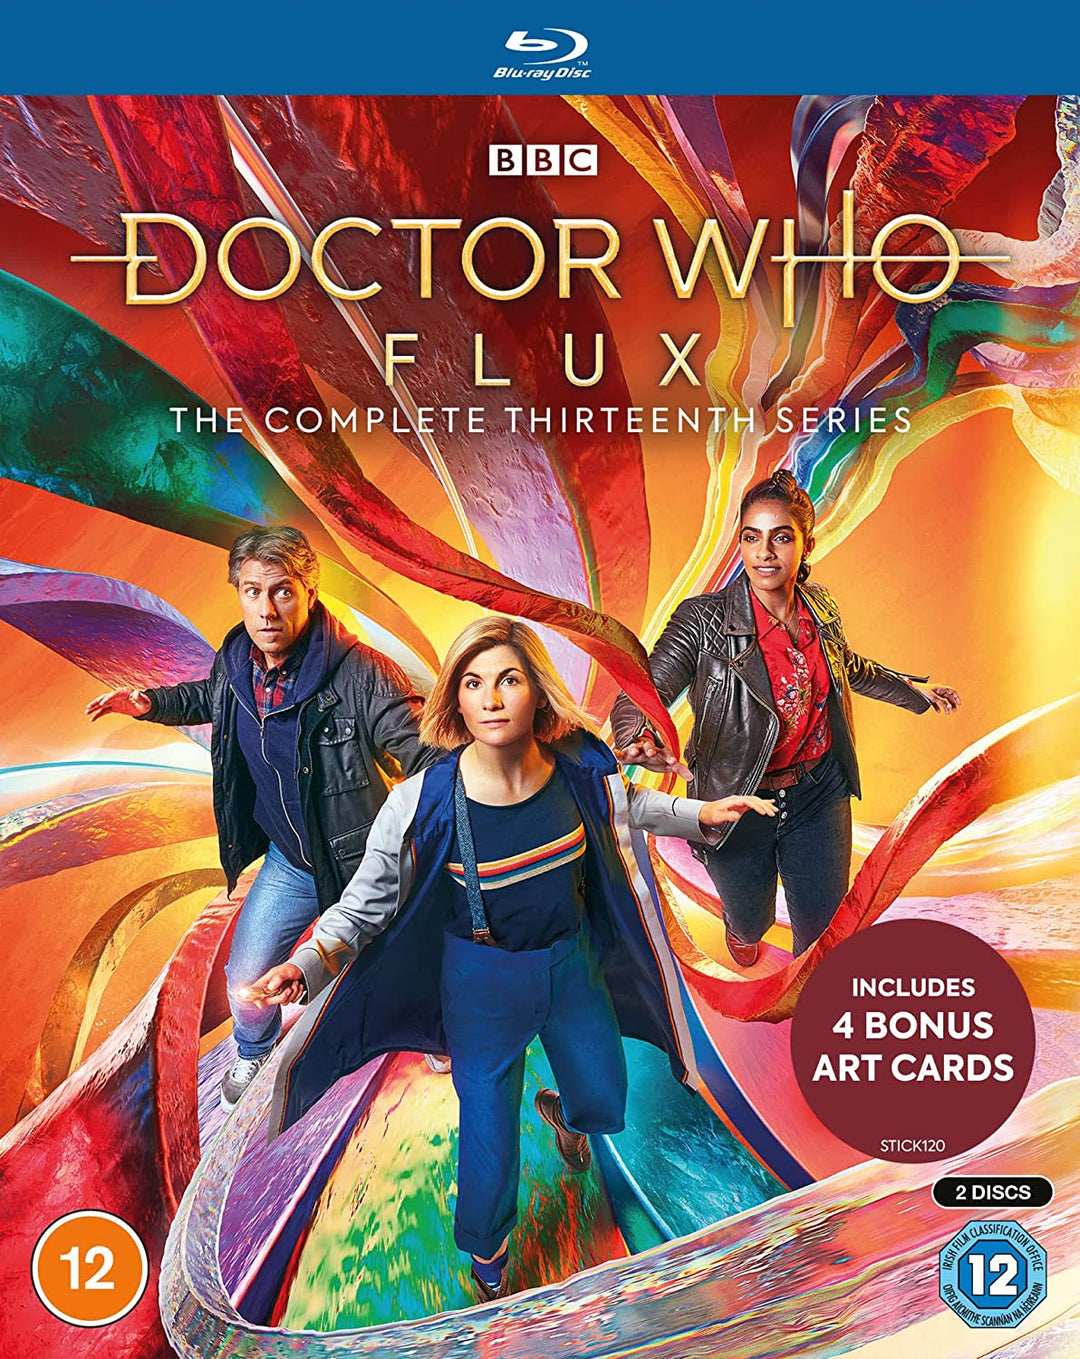 Doctor Who - Series 13 - Flux (includes 4 Exclusive Artcards) [Blu-ray] [2021] - Sci-fi [Blu-ray]